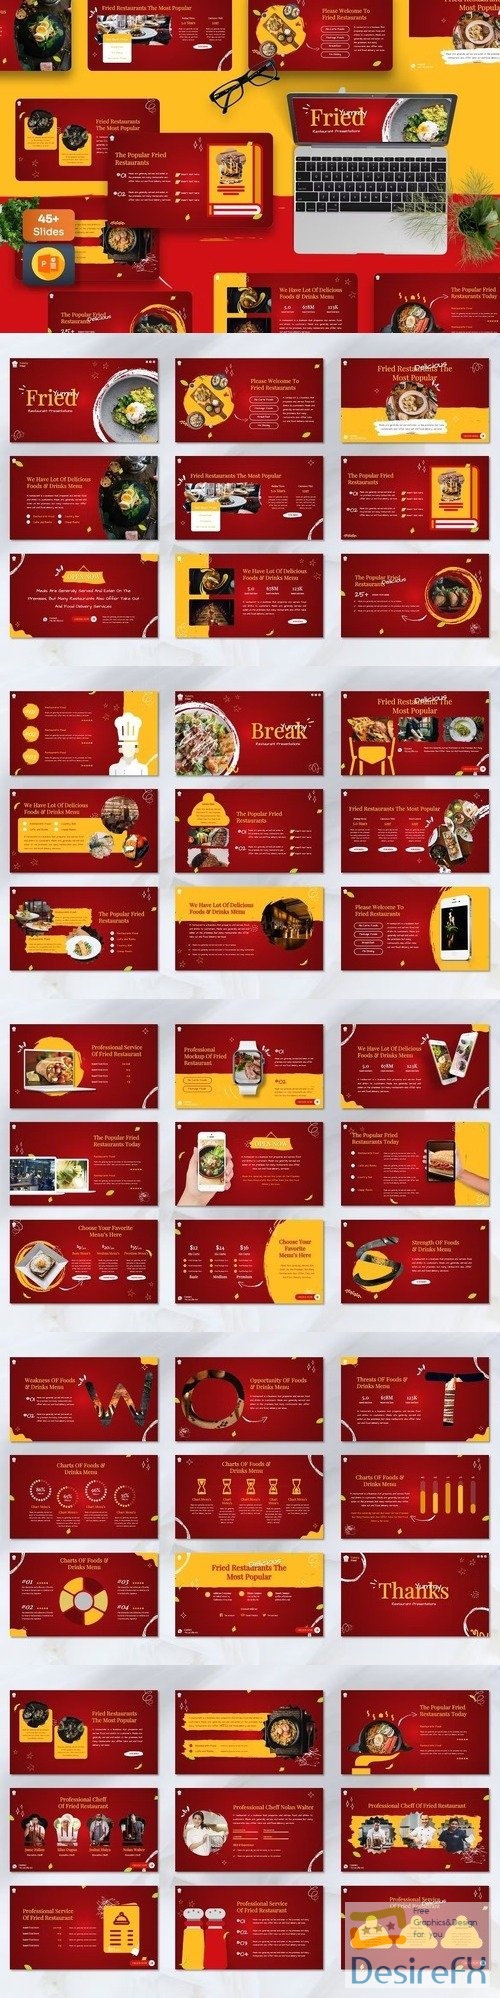 Fried - Food Restaurant Powerpoint Templates